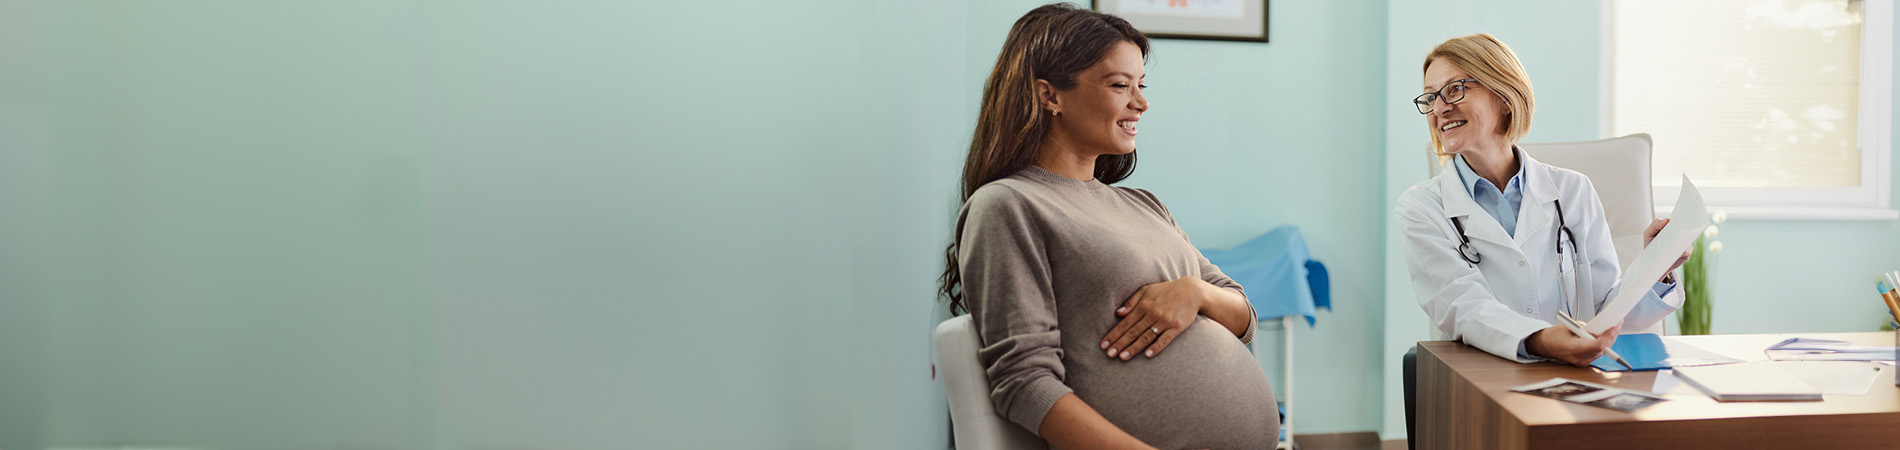 Pregnant woman in doctor's office with doctor